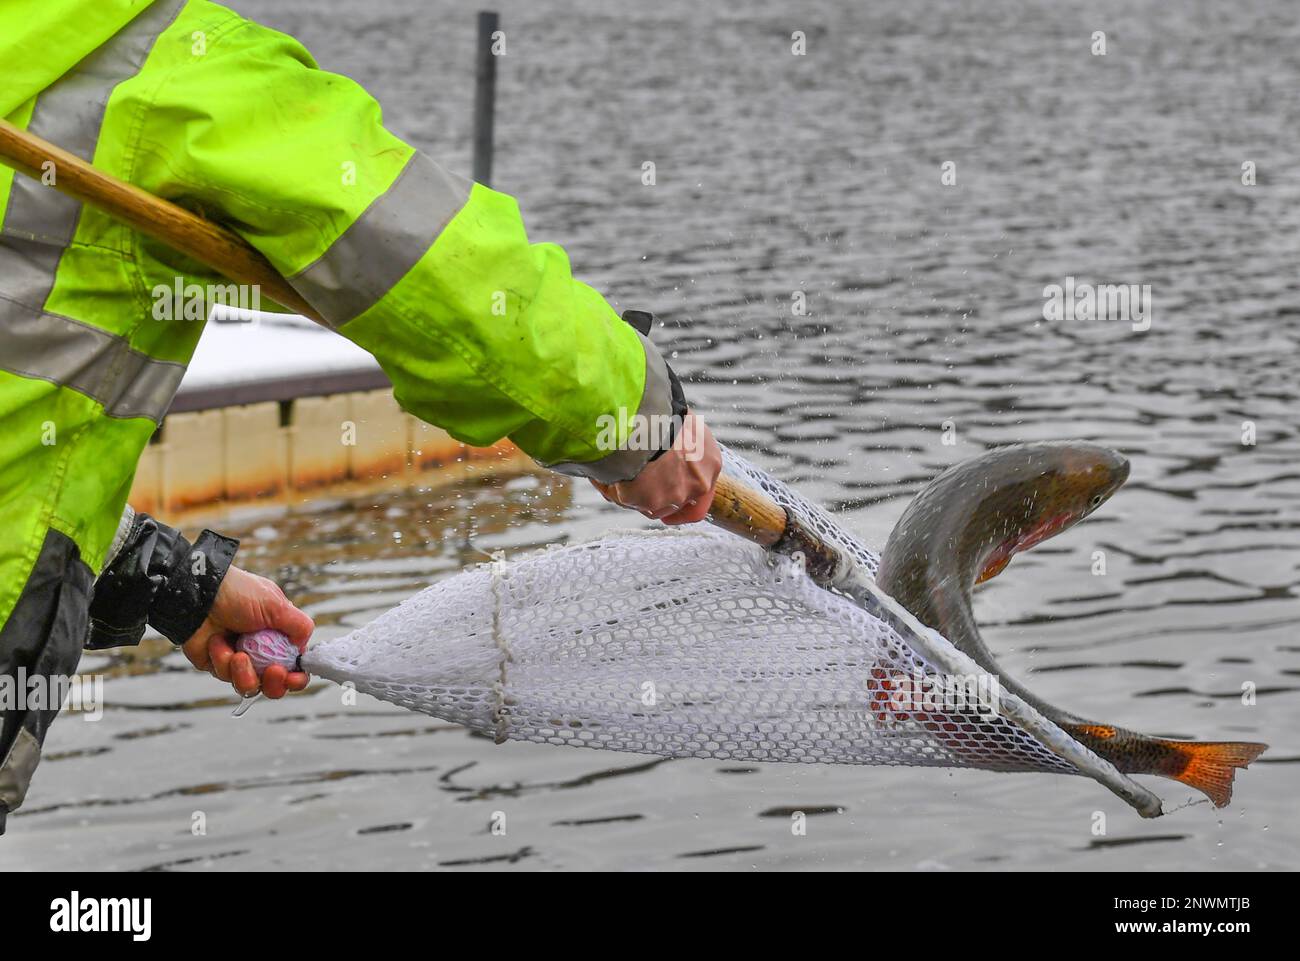 https://c8.alamy.com/comp/2NWMTJB/wyoming-united-states-28th-feb-2023-a-rainbow-trout-is-thrown-into-the-lake-throwing-them-is-not-harmful-and-makes-them-active-the-pennsylvania-fish-and-boat-commission-stocks-streams-and-lakes-for-fishing-season-they-stock-using-a-truck-with-a-tank-that-holds-fish-from-a-hatchery-hoses-nets-and-buckets-today-they-stocked-frances-slouch-state-park-with-rainbow-golden-and-regular-trout-credit-sopa-images-limitedalamy-live-news-2NWMTJB.jpg